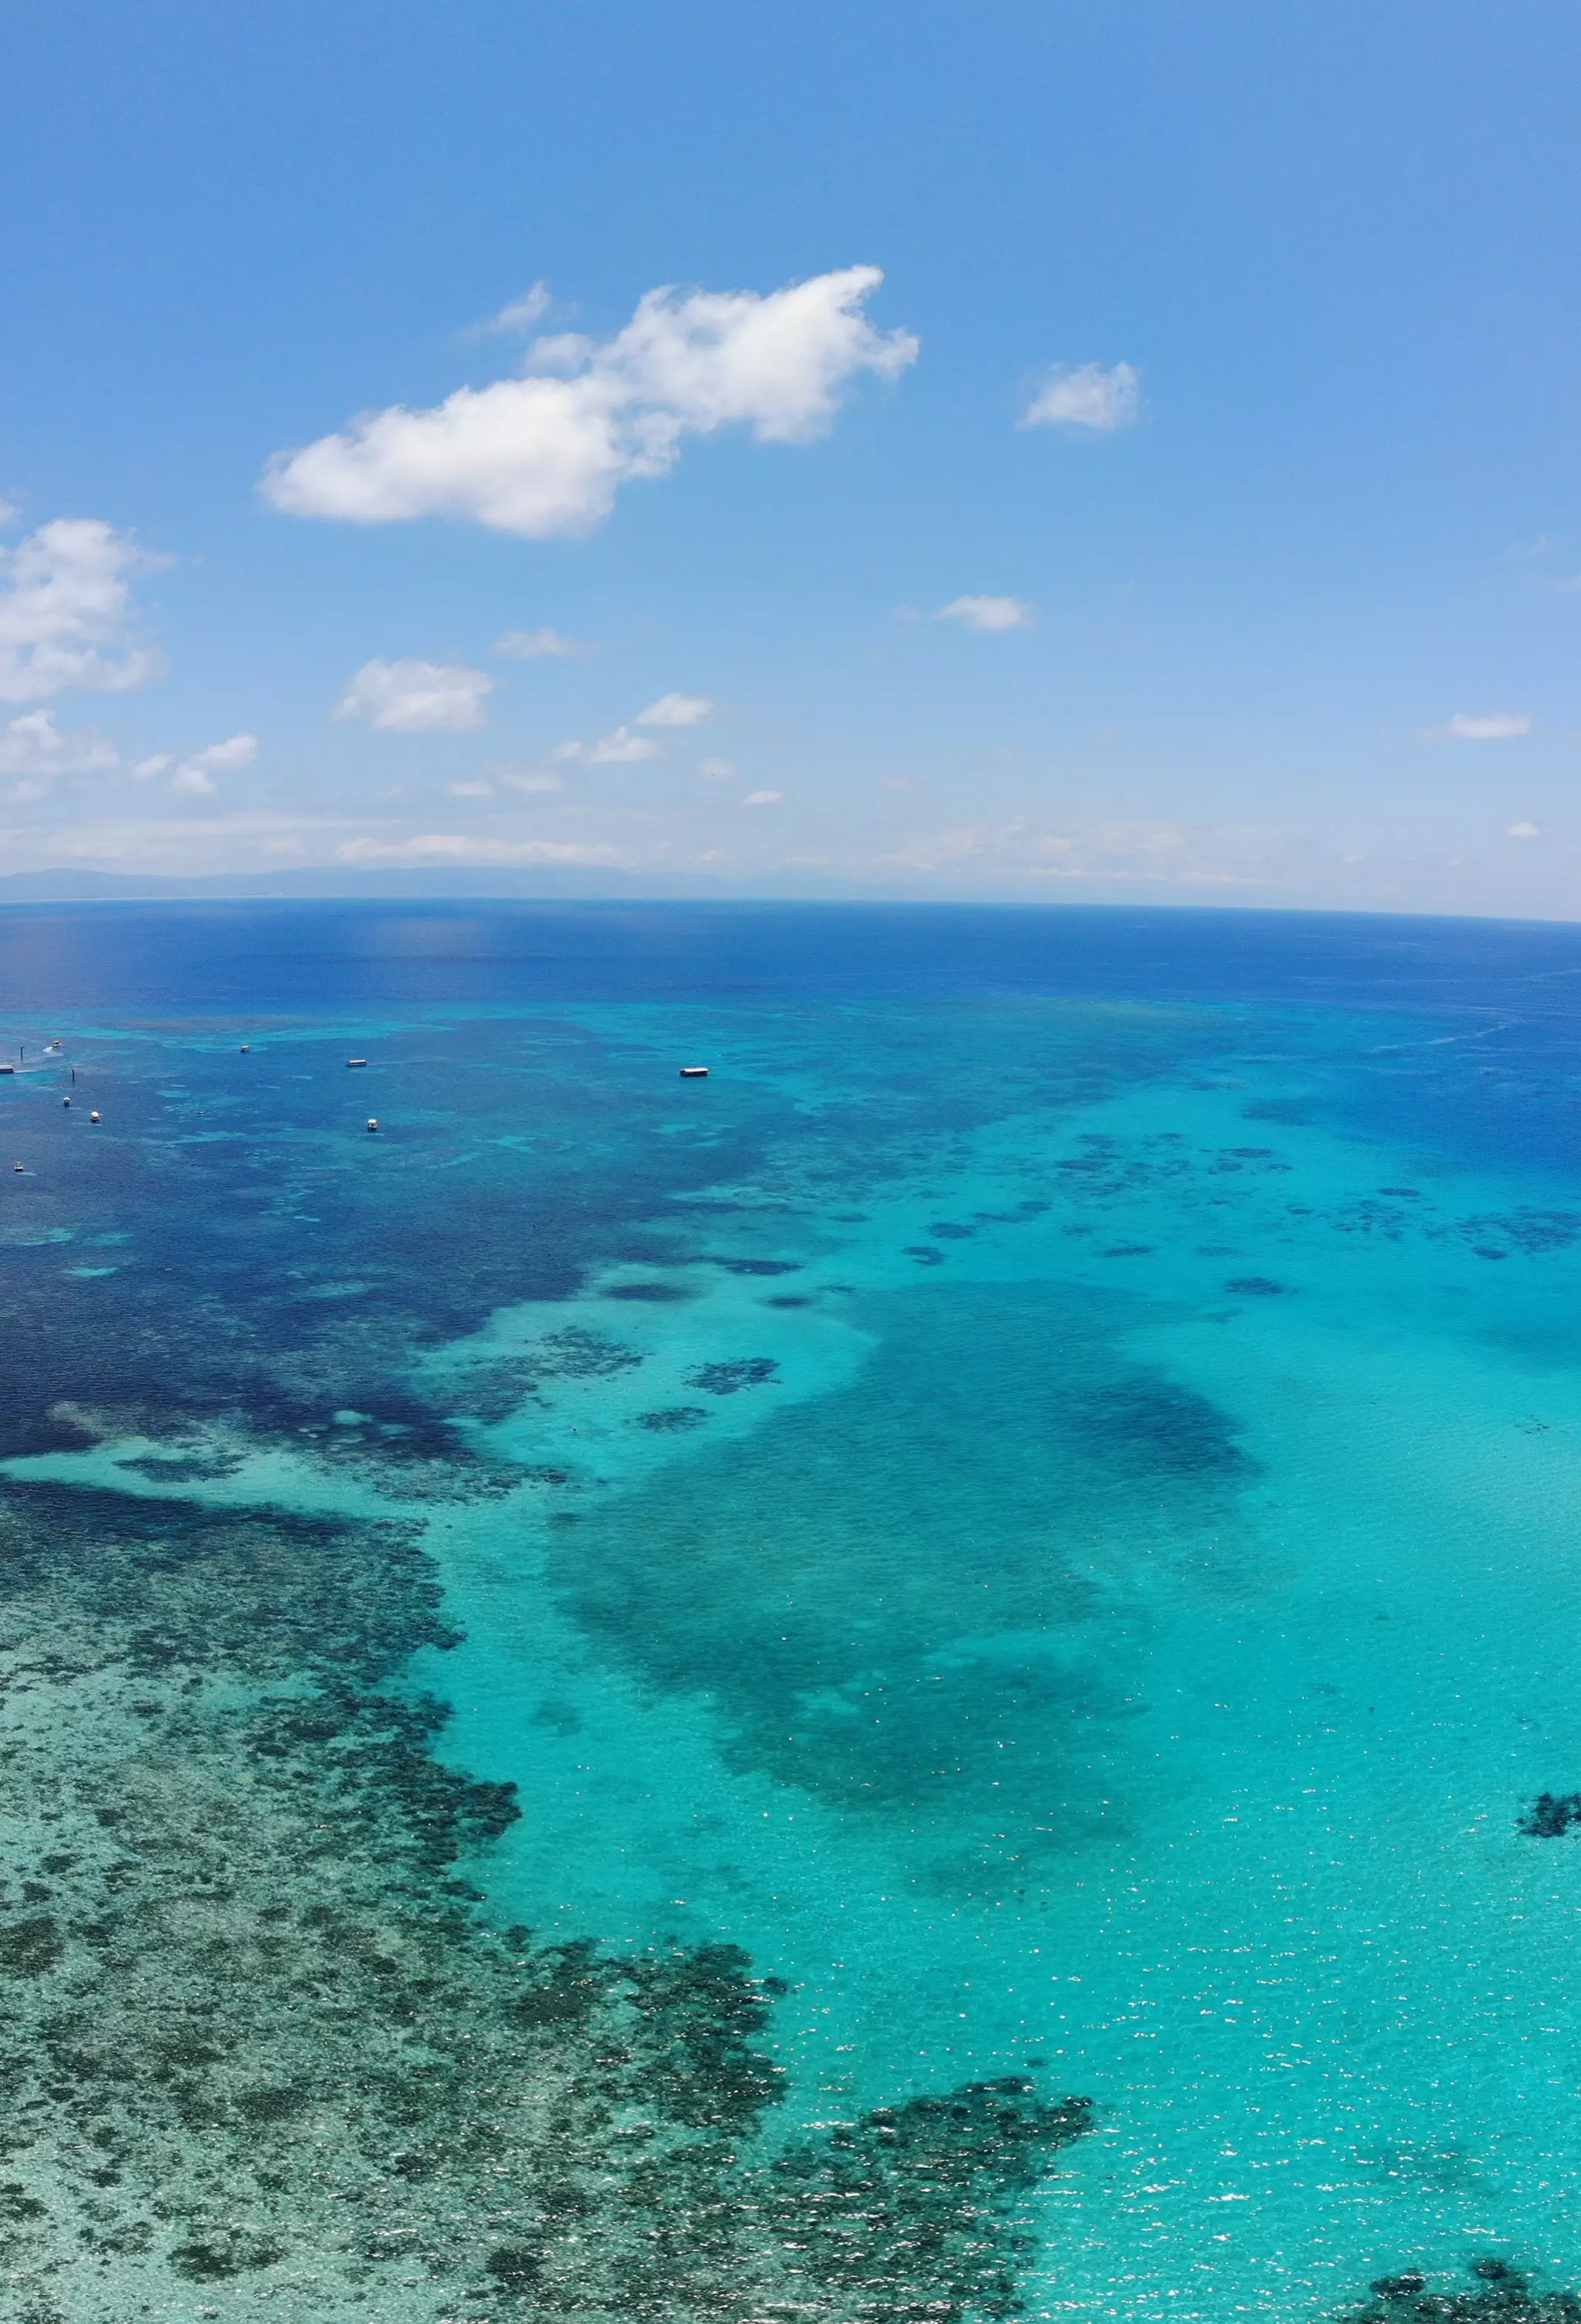 The Great Barrier Reef (